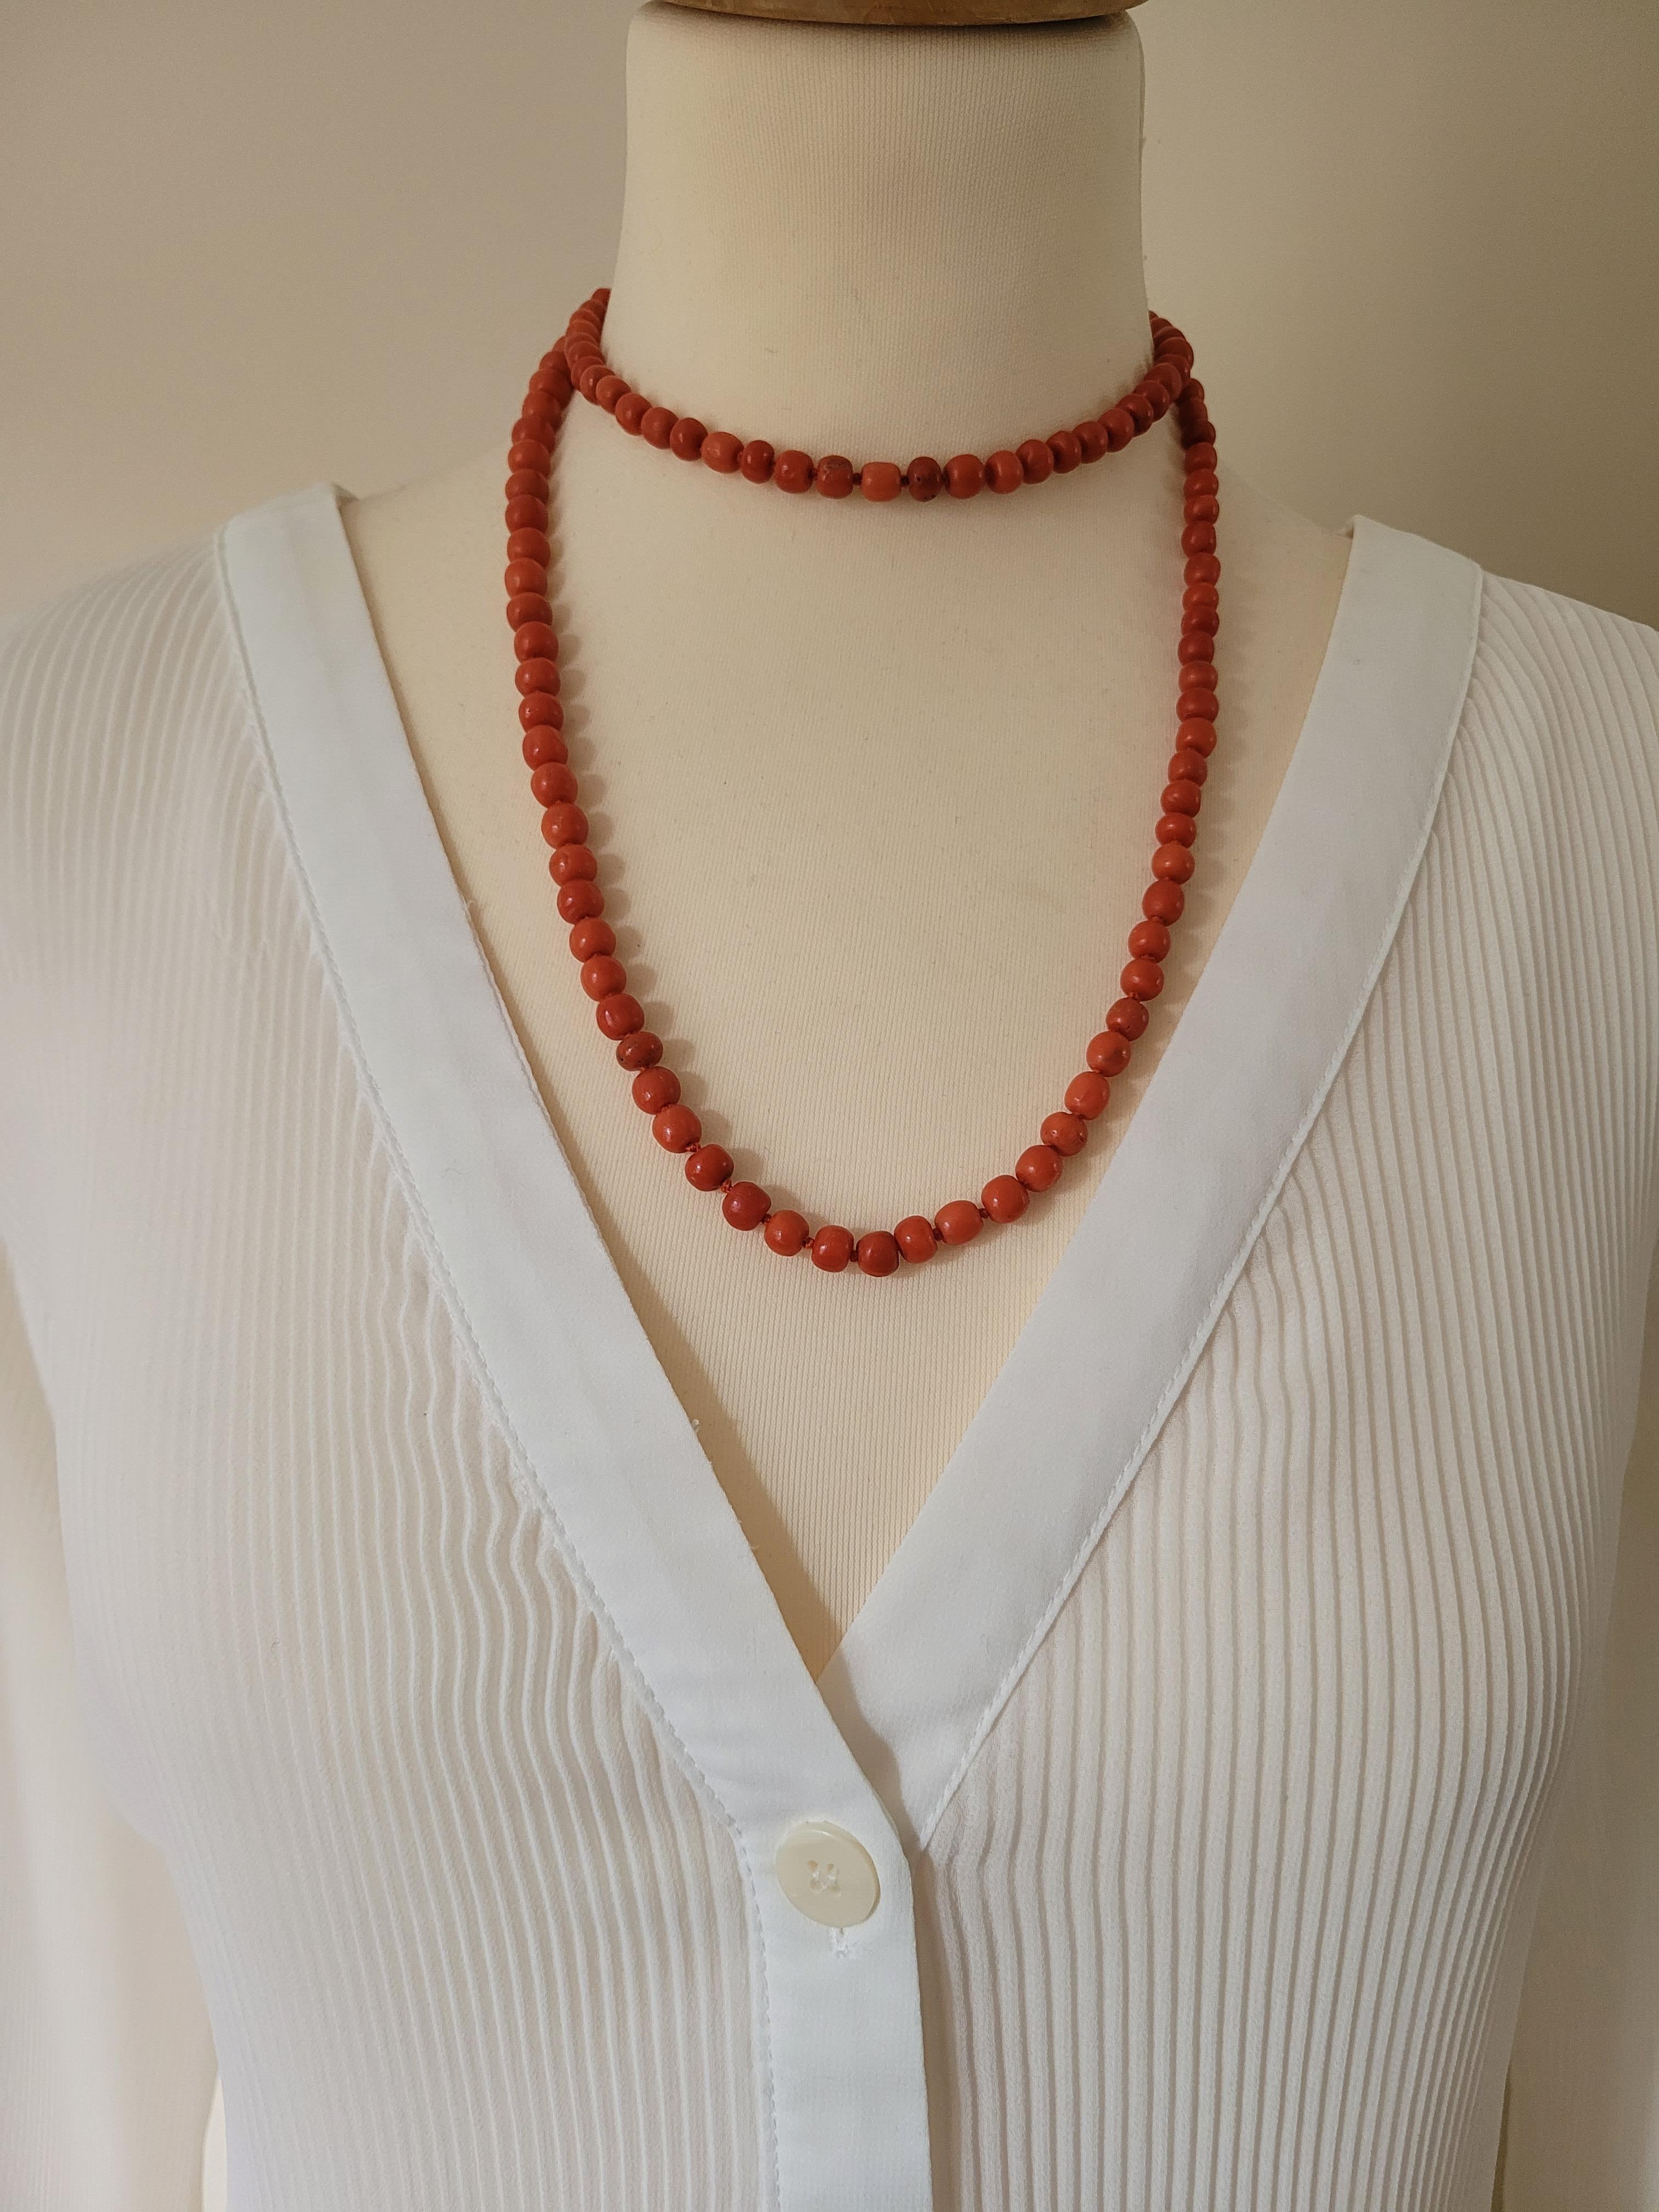 An Antique Victorian c.1880s hand knotted natural Red Salmon Coral Opera length beads necklace on gold color metal bolt clasp. English origin.
Length of the necklace including clasp 38